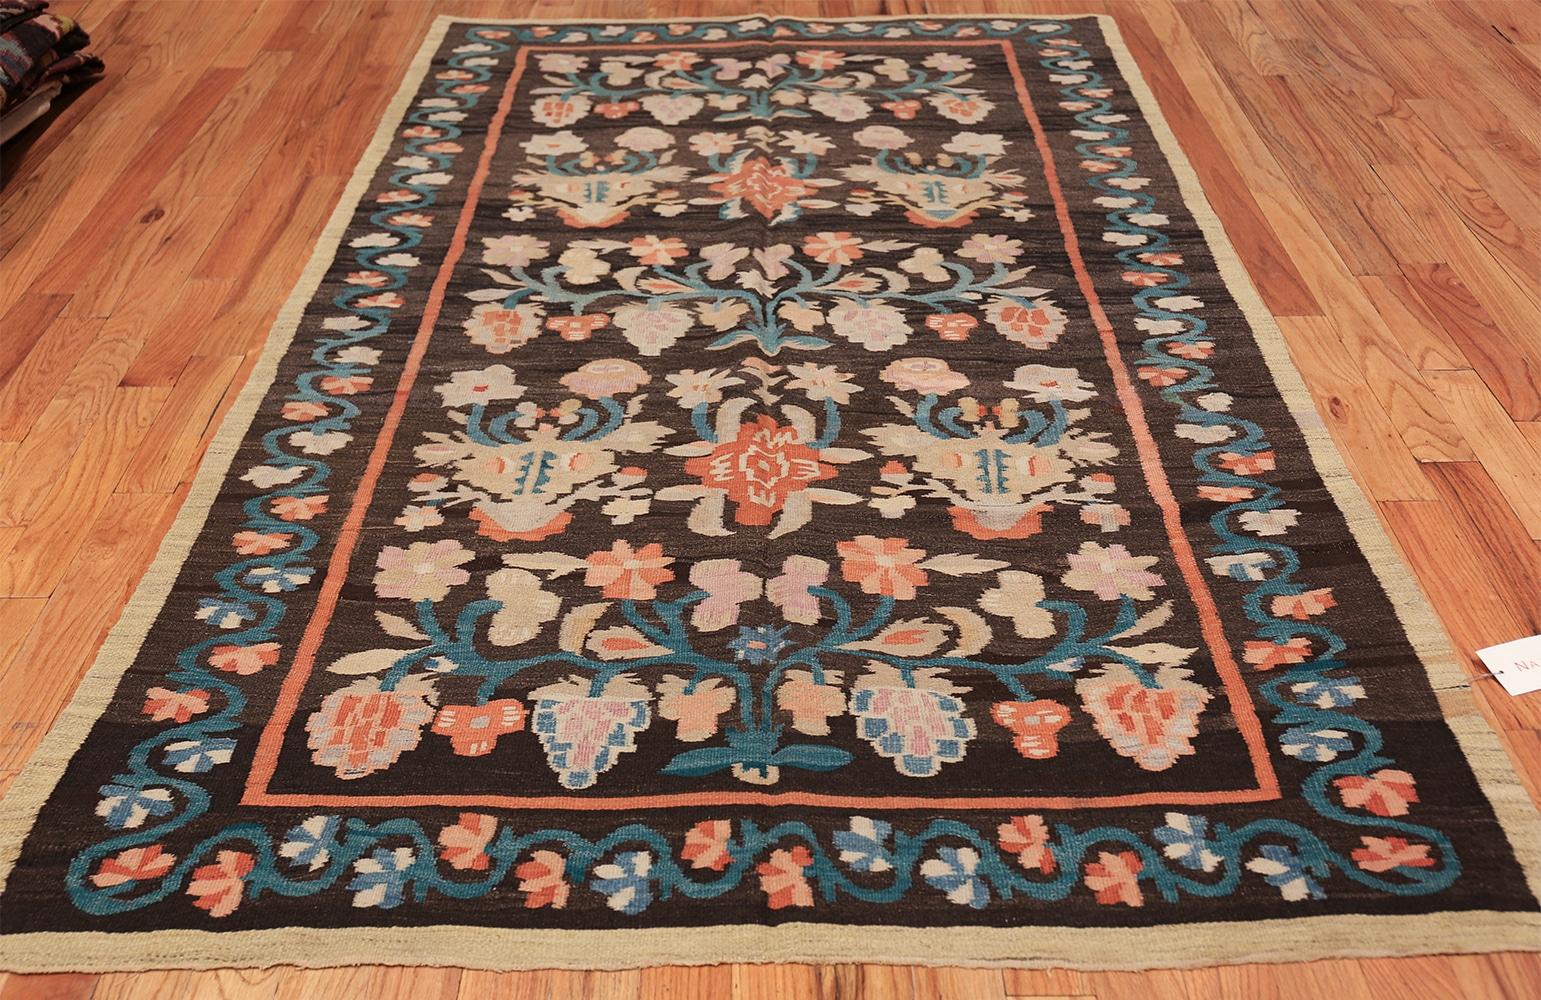 A Magnificent Antique Brown Artistic Floral Design Flat Woven Bessarabian Kilim Rug, Origin: Romania, Circa: 1900 – Without a doubt, the antique flatwoven Bessarabian kilim rugs have been some of the most sought after types of area rugs for decades.